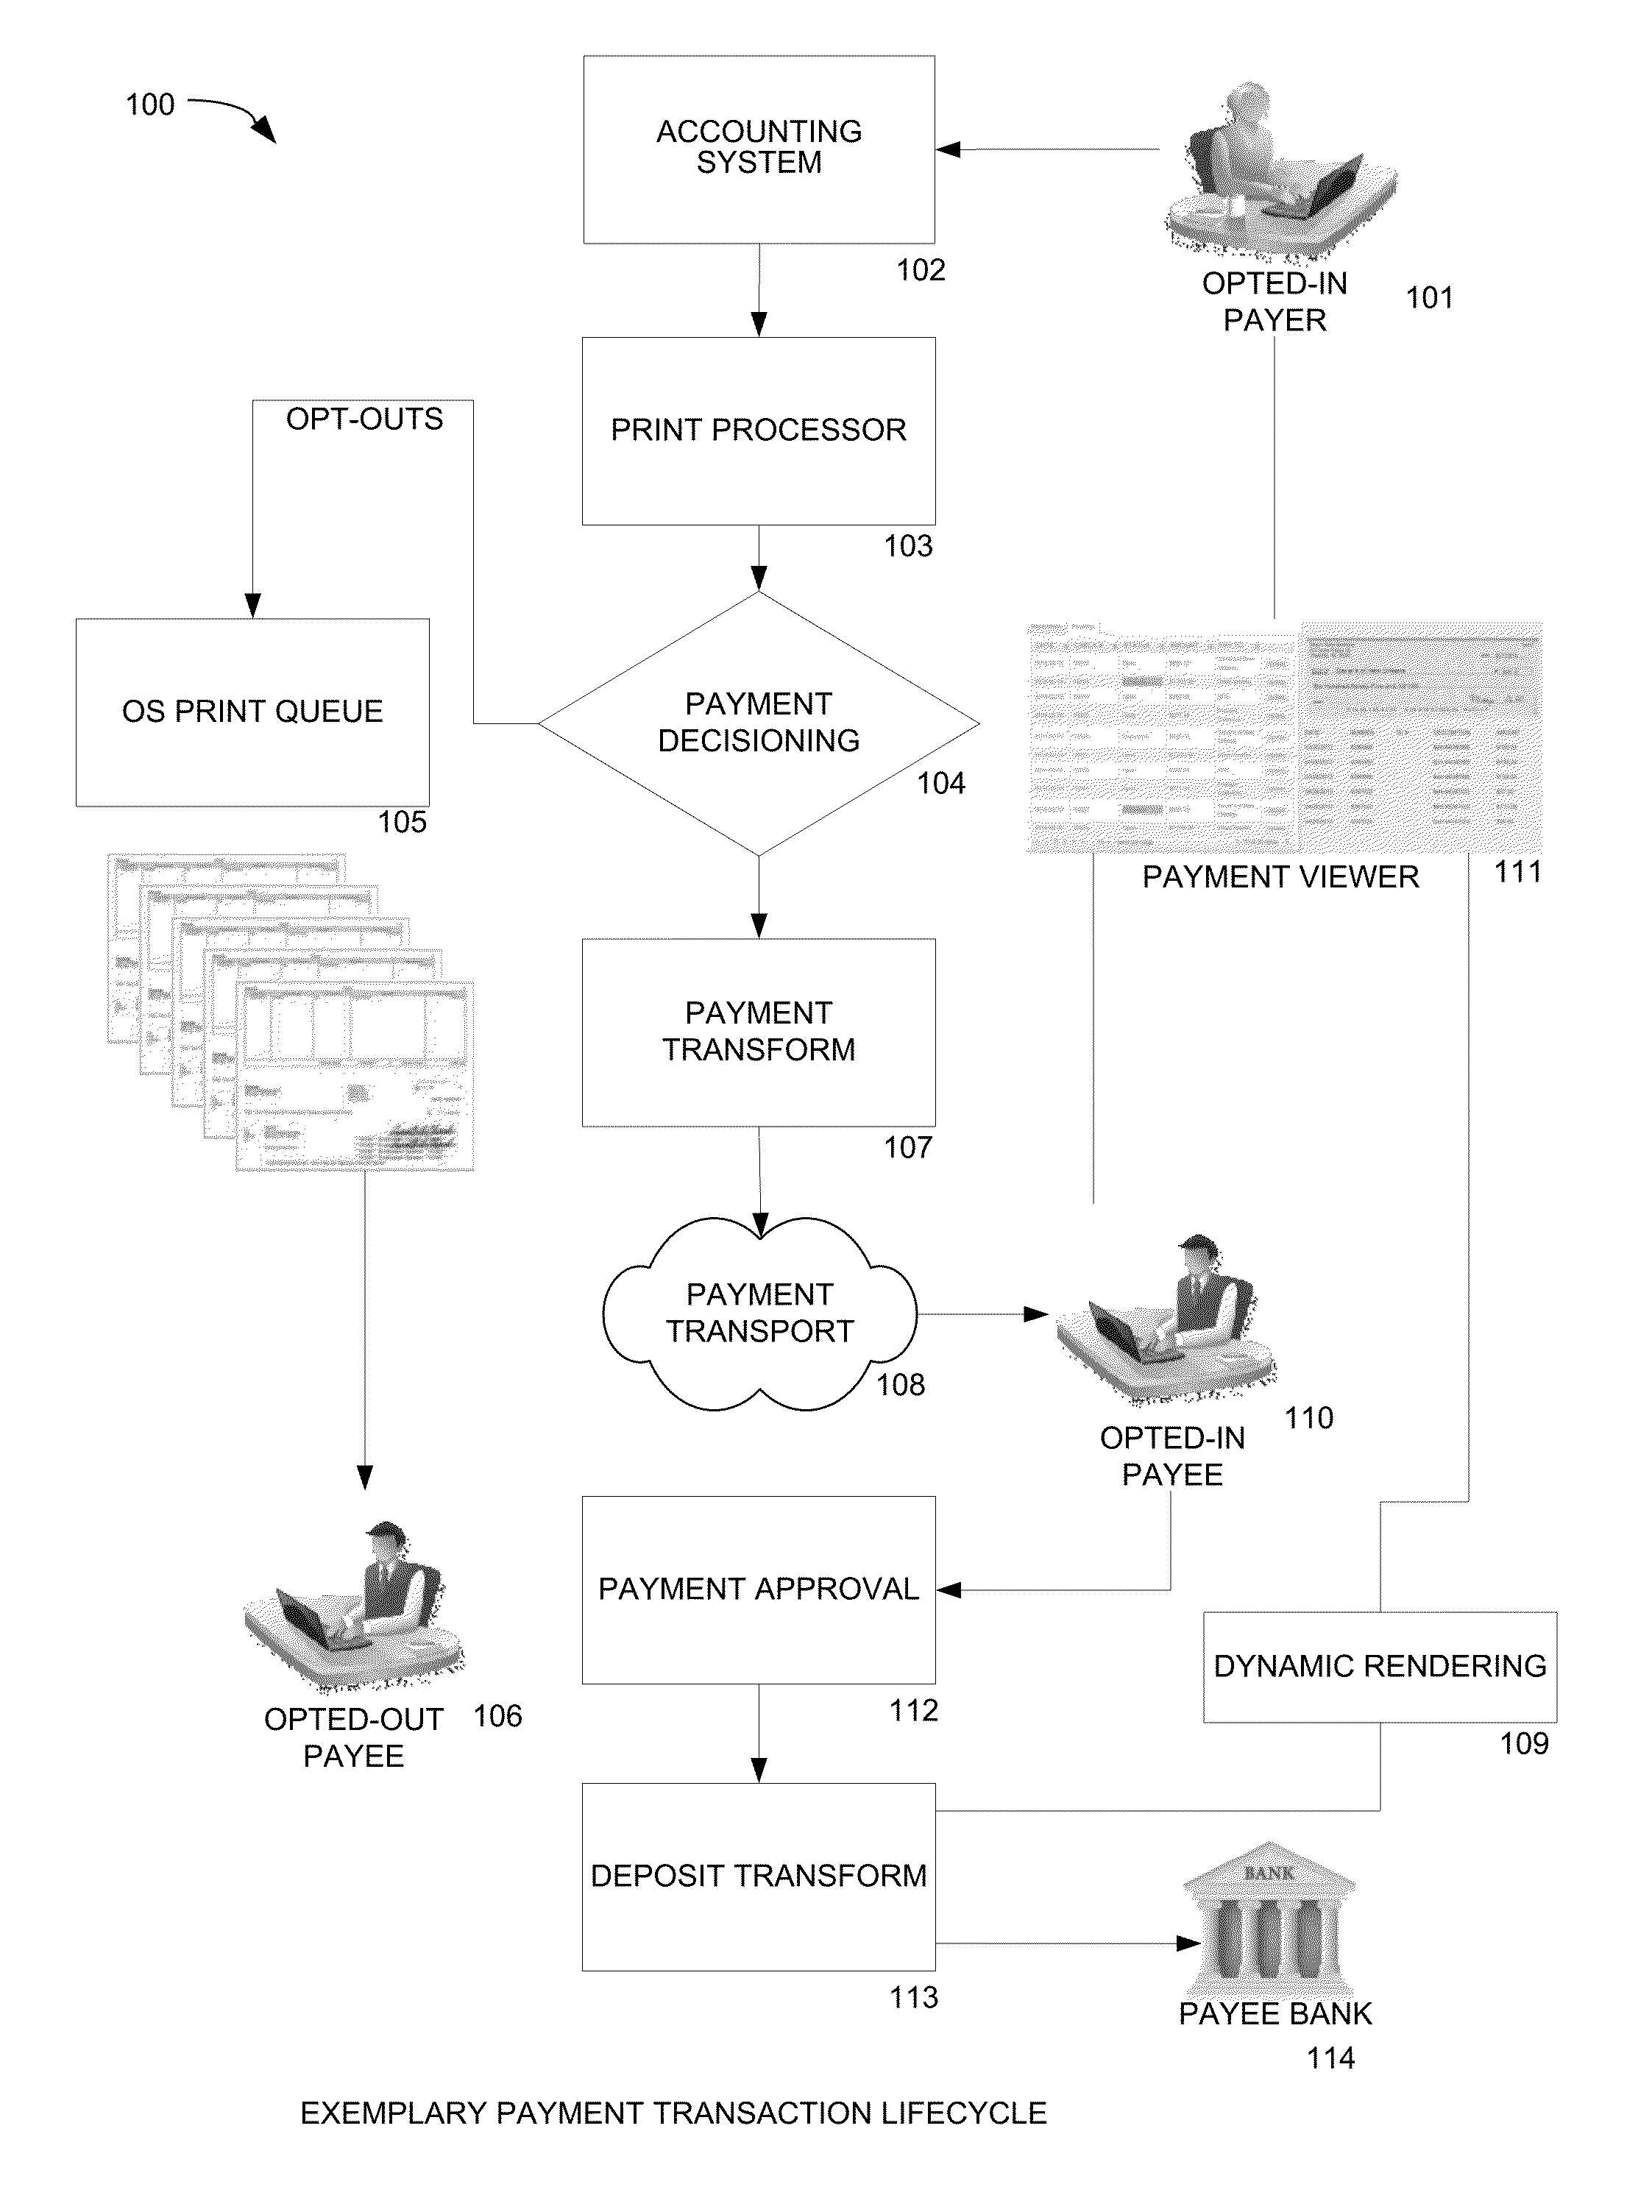 Electronic Payment System Operative with Existing Accounting Software and Existing Remote Deposit Capture and Mobile RDC Software